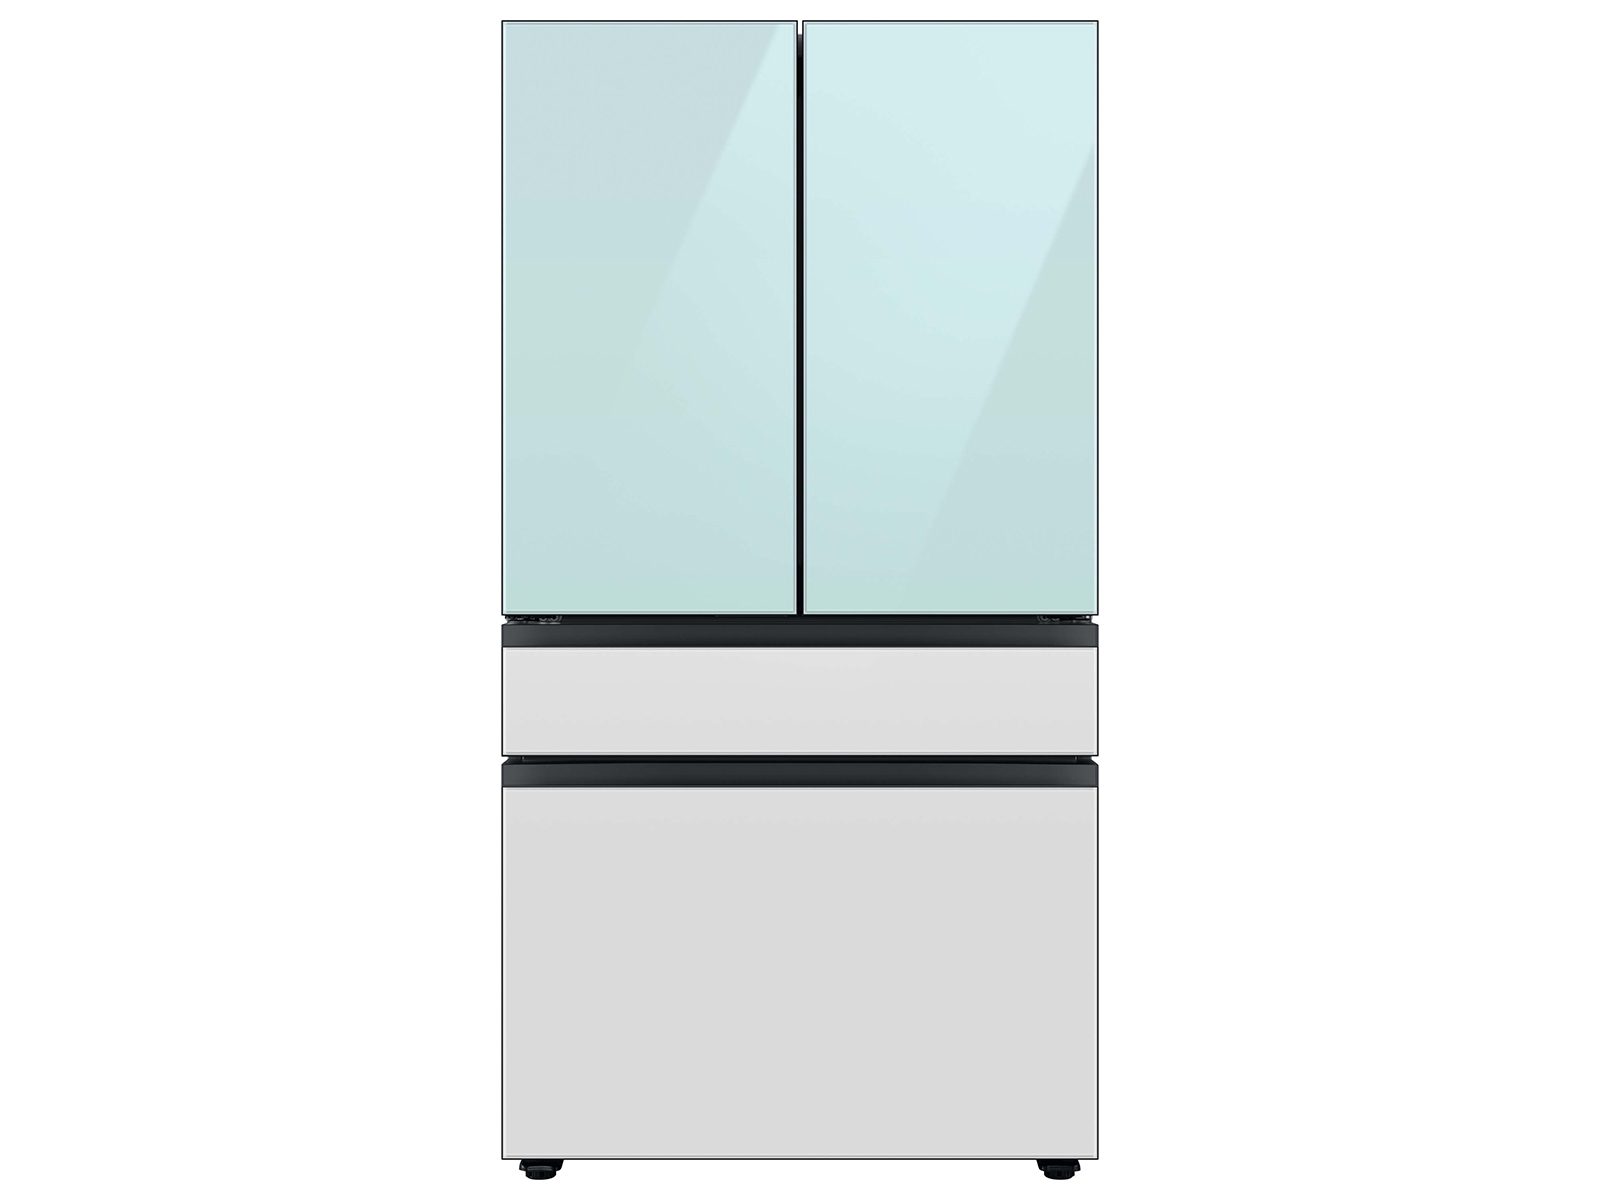 Samsung Bespoke 4-Door French Door Refrigerator (23 cu. ft.) with AutoFill Water Pitcher and Customizable Door Panel Colors in Morning Blue Glass Top Panels and in White Glass Middle and Bottom Panels